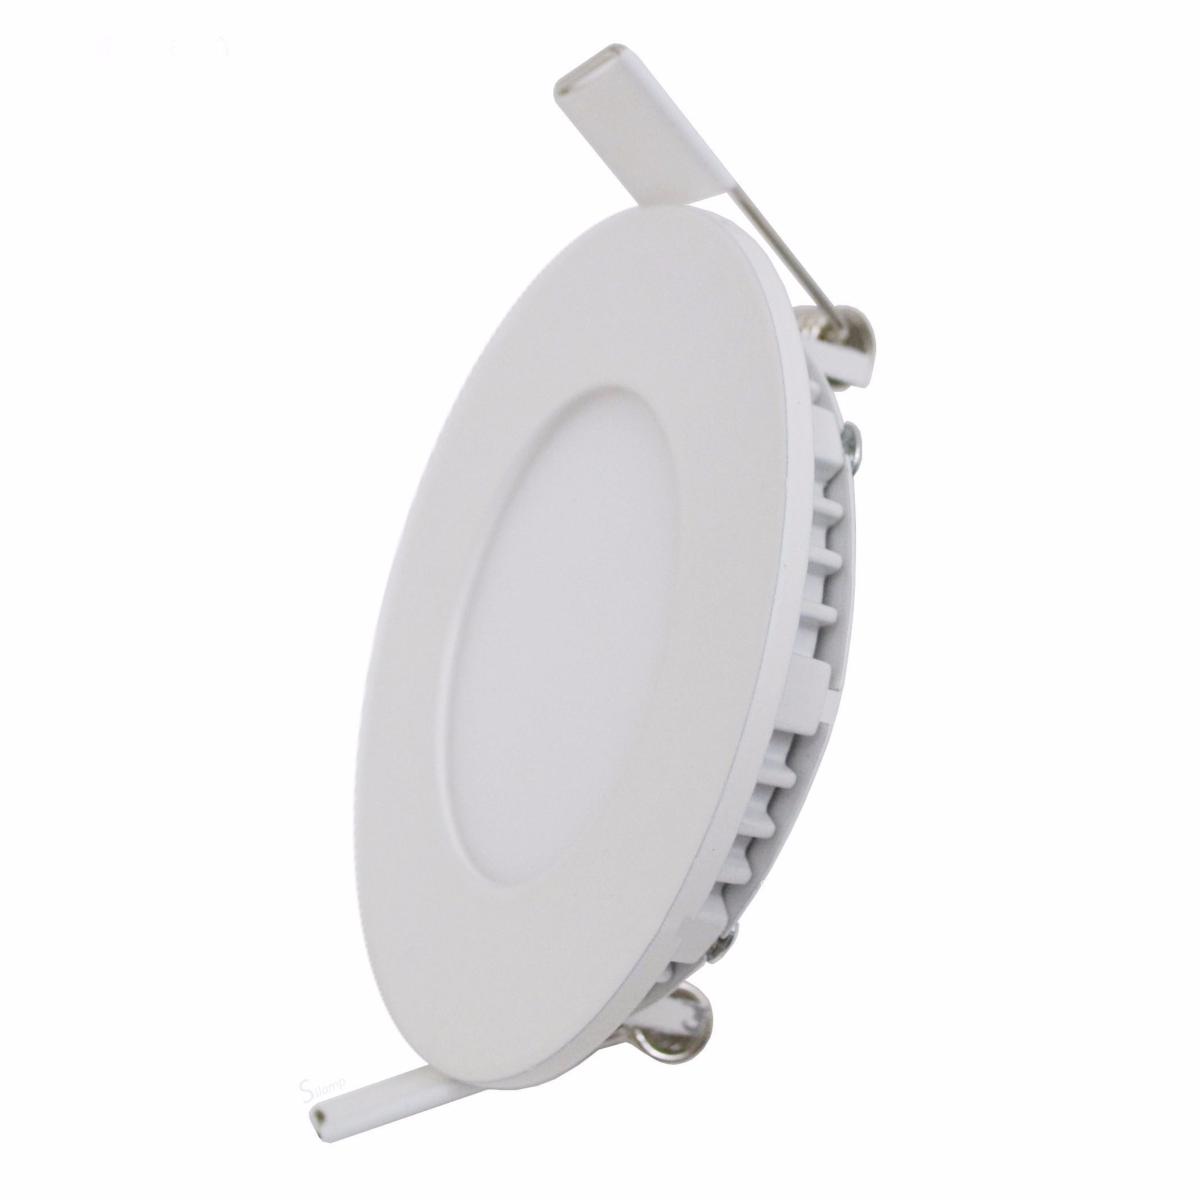 Spot LED Extra Plat Rond BLANC 12W - Silamp France